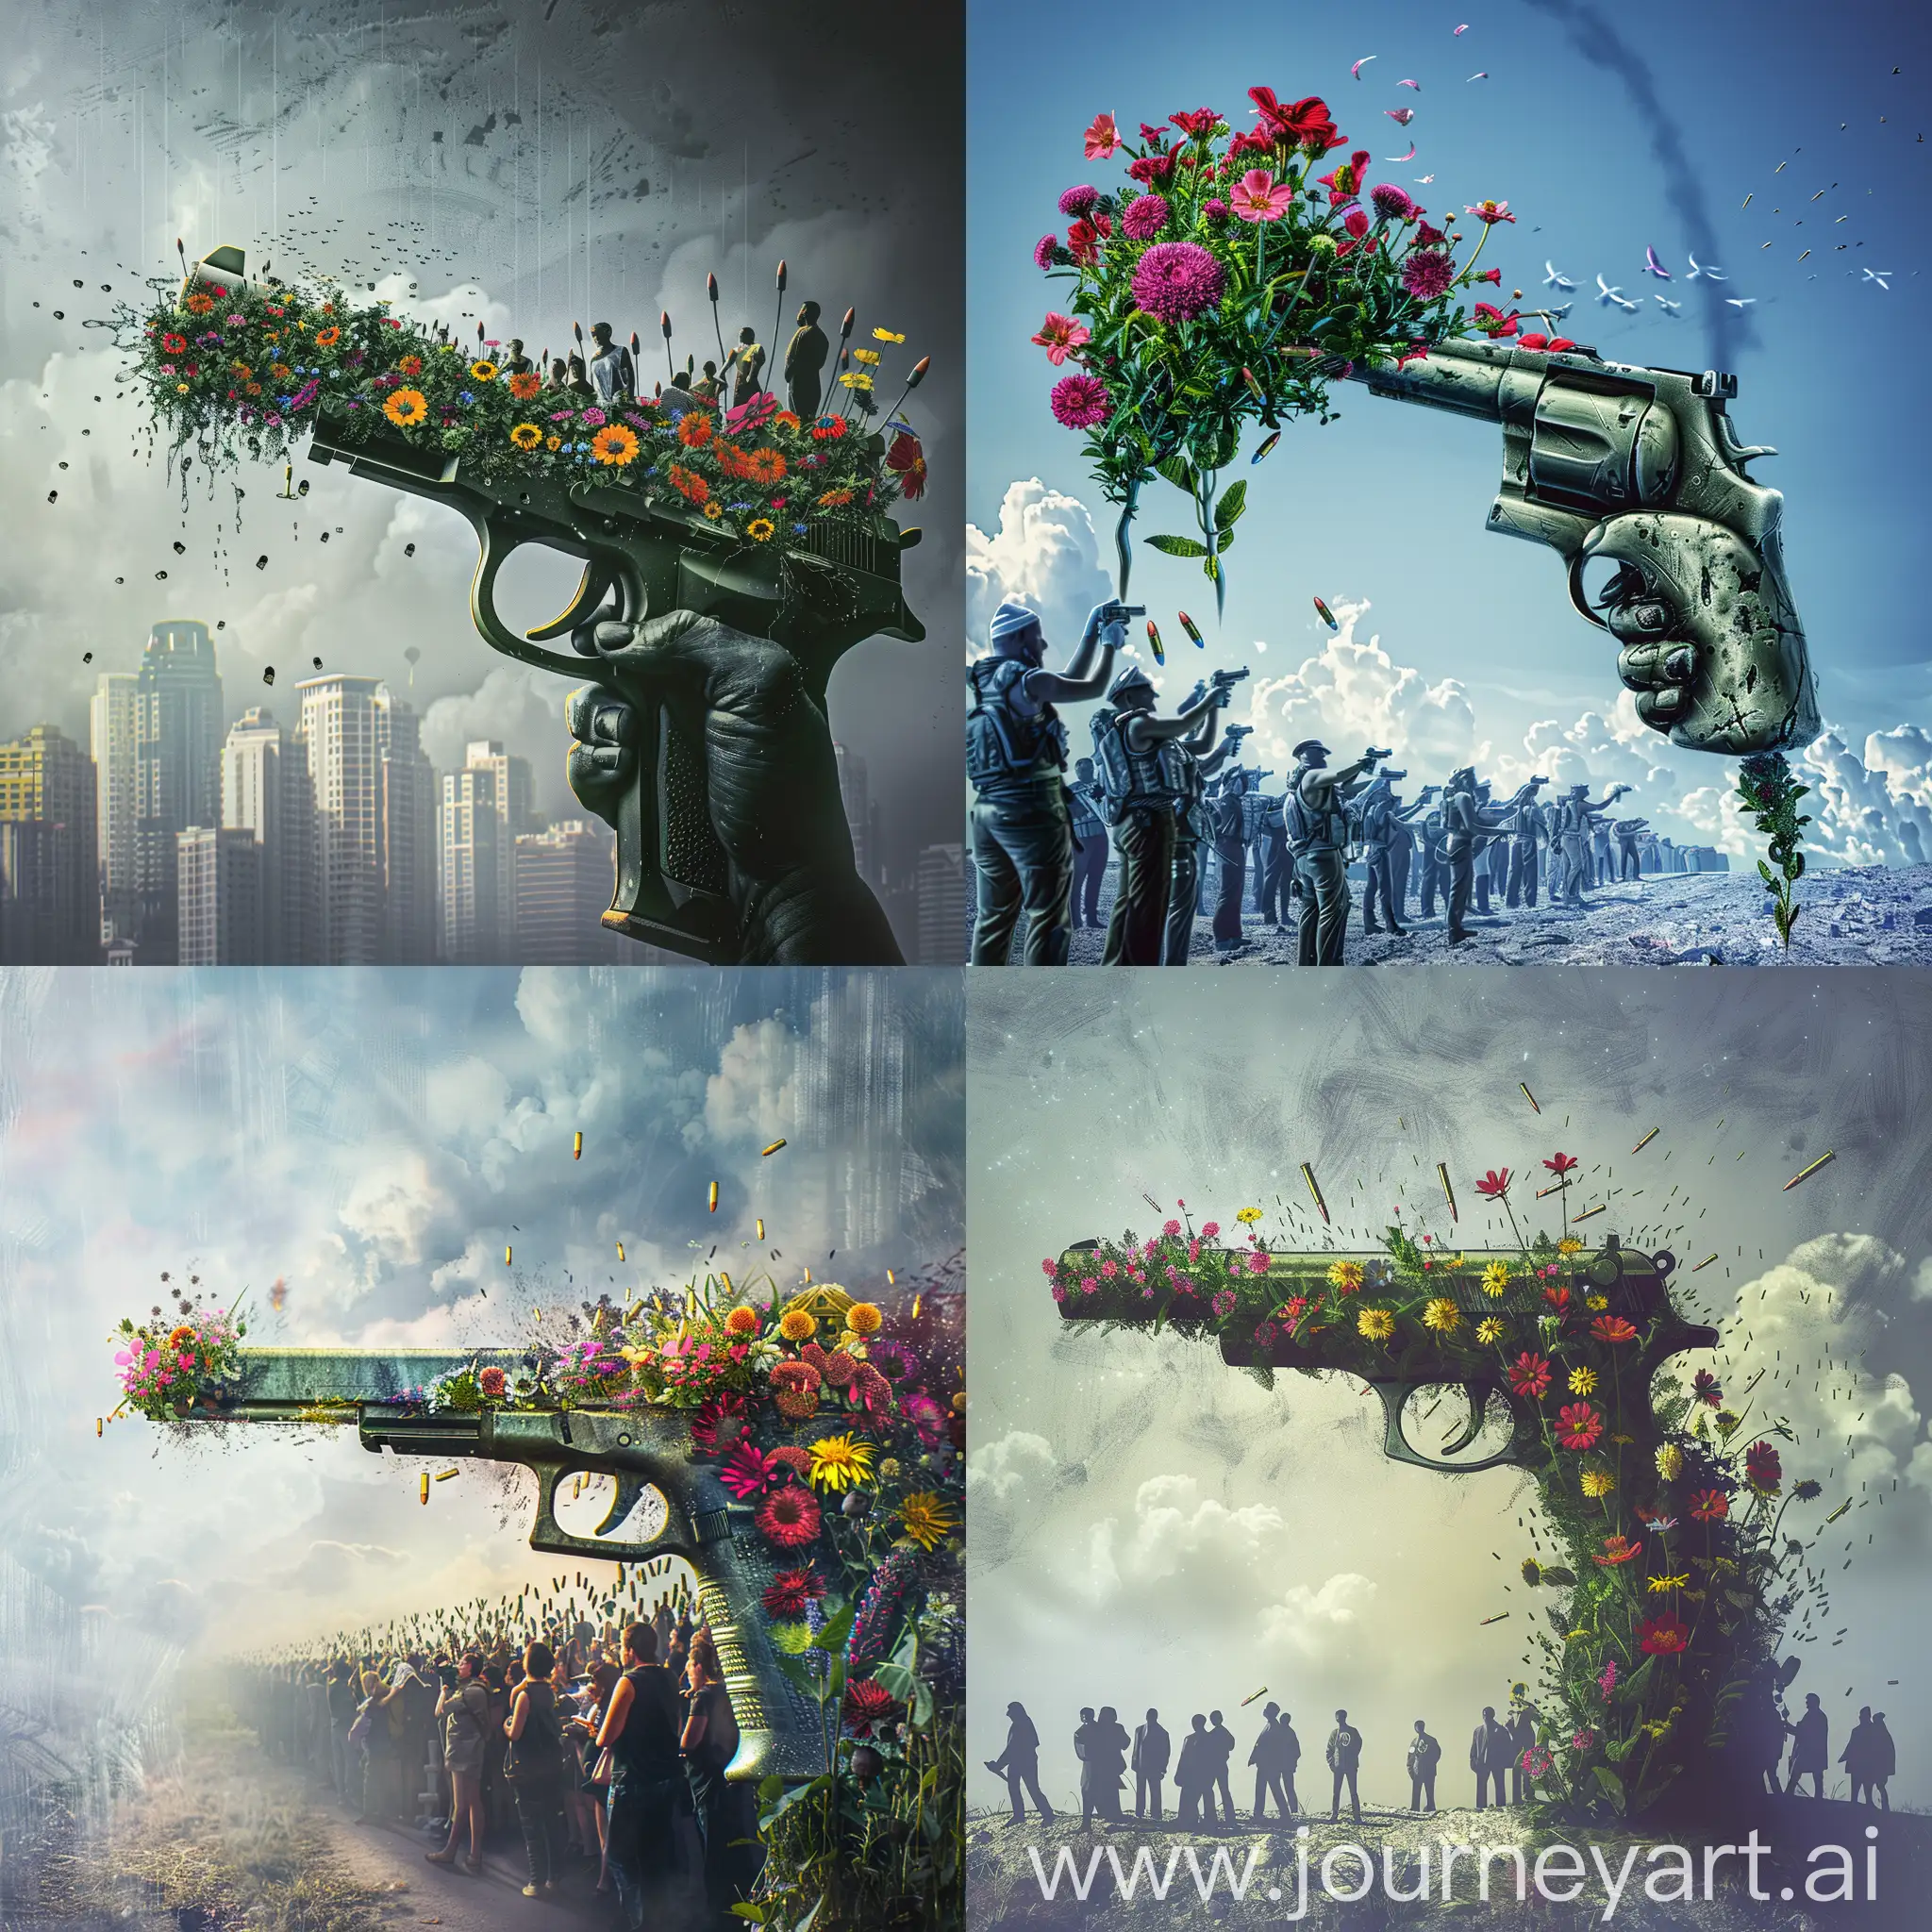 The image I have in mind for nft is a gun that is pointed at people, but instead of bullets, flowers have grown from it, which shows that a country wants security, freedom and peace for its people.Considering that my goal is to sell to political and social activists in the field of freedom and world peace, as well as campaigns related to human rights and individual and social freedoms in the field of world peace.
The type of image I want is concept art and portrait art